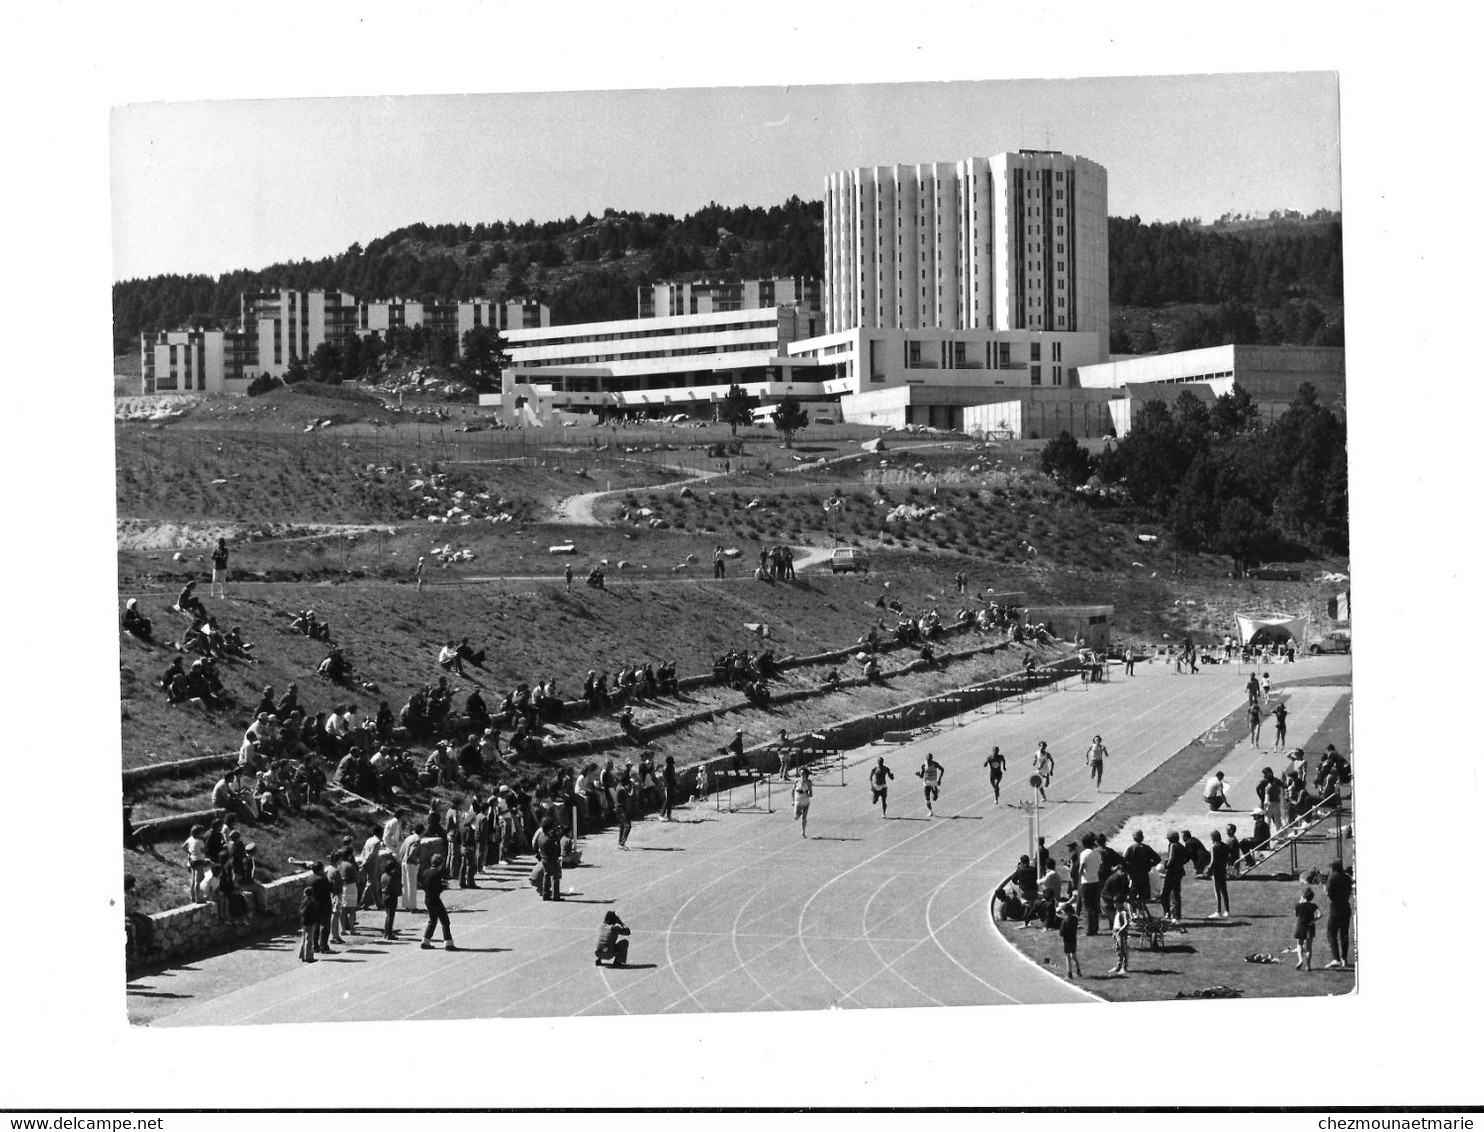 FONT ROMEU - STADE CITE PREOLYMPIQUE - COURSE A PIED - PYRENEES ORIENTALES PHOTO 24.5*17.5 CM - Sports